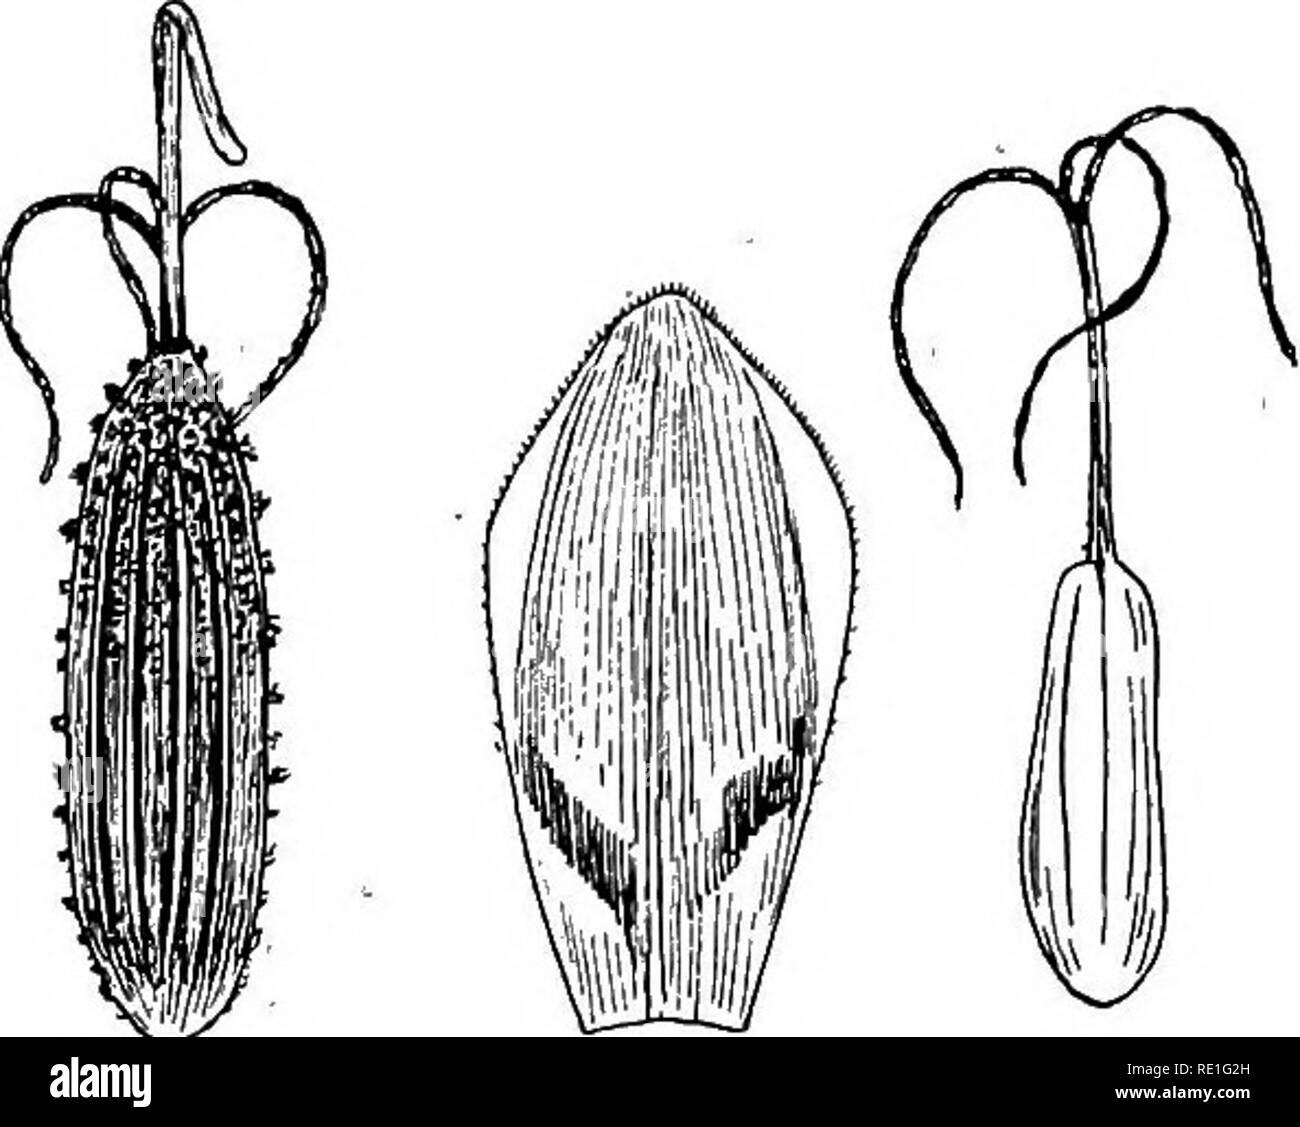 . The phanerogams of the Juan Fernandez Islands. Botany. Fig. 3. a Heleocharis *fusco$urpurea, bract, x 6, flower and fruit, X 12. b Uncinia costata, utricle, bract and pistil, X 6. *23. U. costata Kiikenth. Cyp. nov. V. 433. — Fig. 3 b. Masafuera: Q. Loberia, stony ground in forest, 280 m, with the preceding. A very distinct species, well separated from U. Douglasii, to which it is related. Area of distribution: Endemic in Masafuera. (fr. *24. U. phleoides Pers. Masafuera: in the fern beds at the Correspondencia Camp, 1130 m, rare z5/2, 5/3 17, no. 370). — New for Juan Fernandez. Dr. KtJKENTH Stock Photo